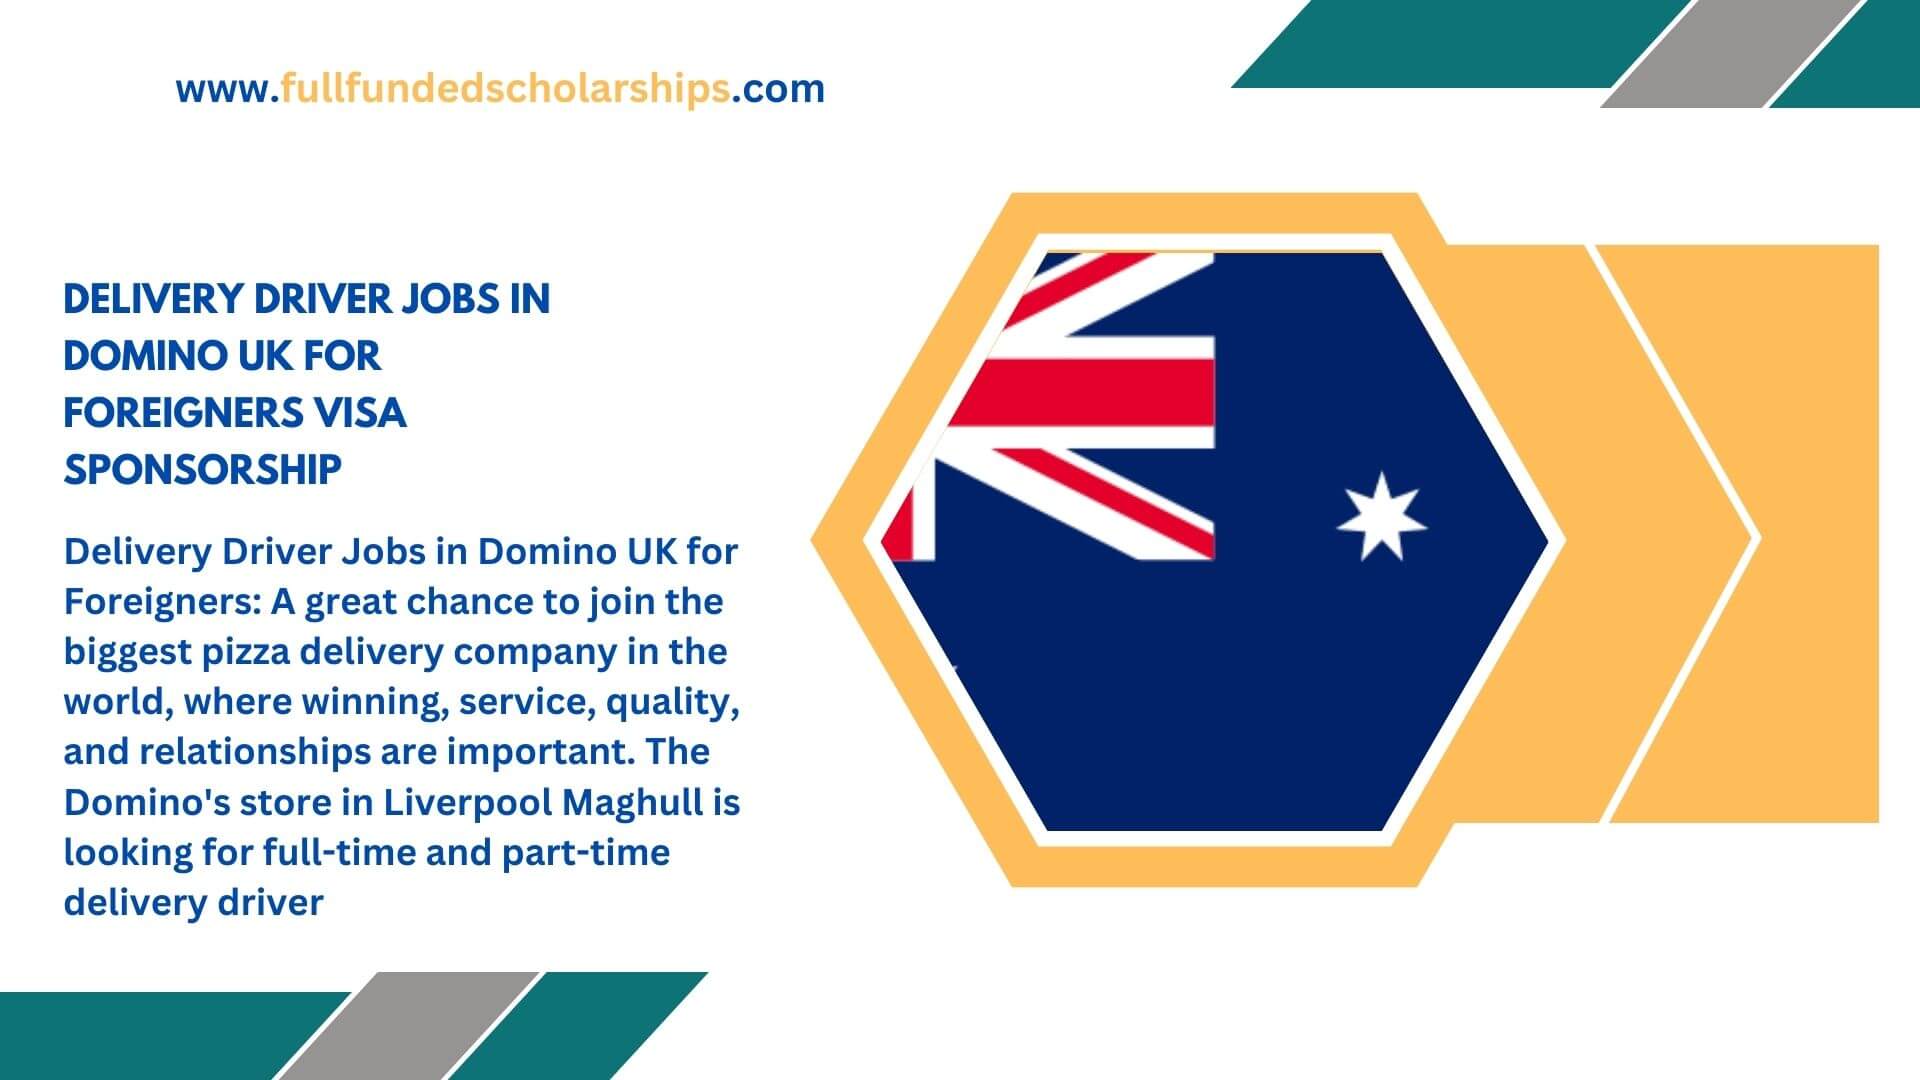 Delivery Driver Jobs in Domino UK for Foreigners Visa Sponsorship